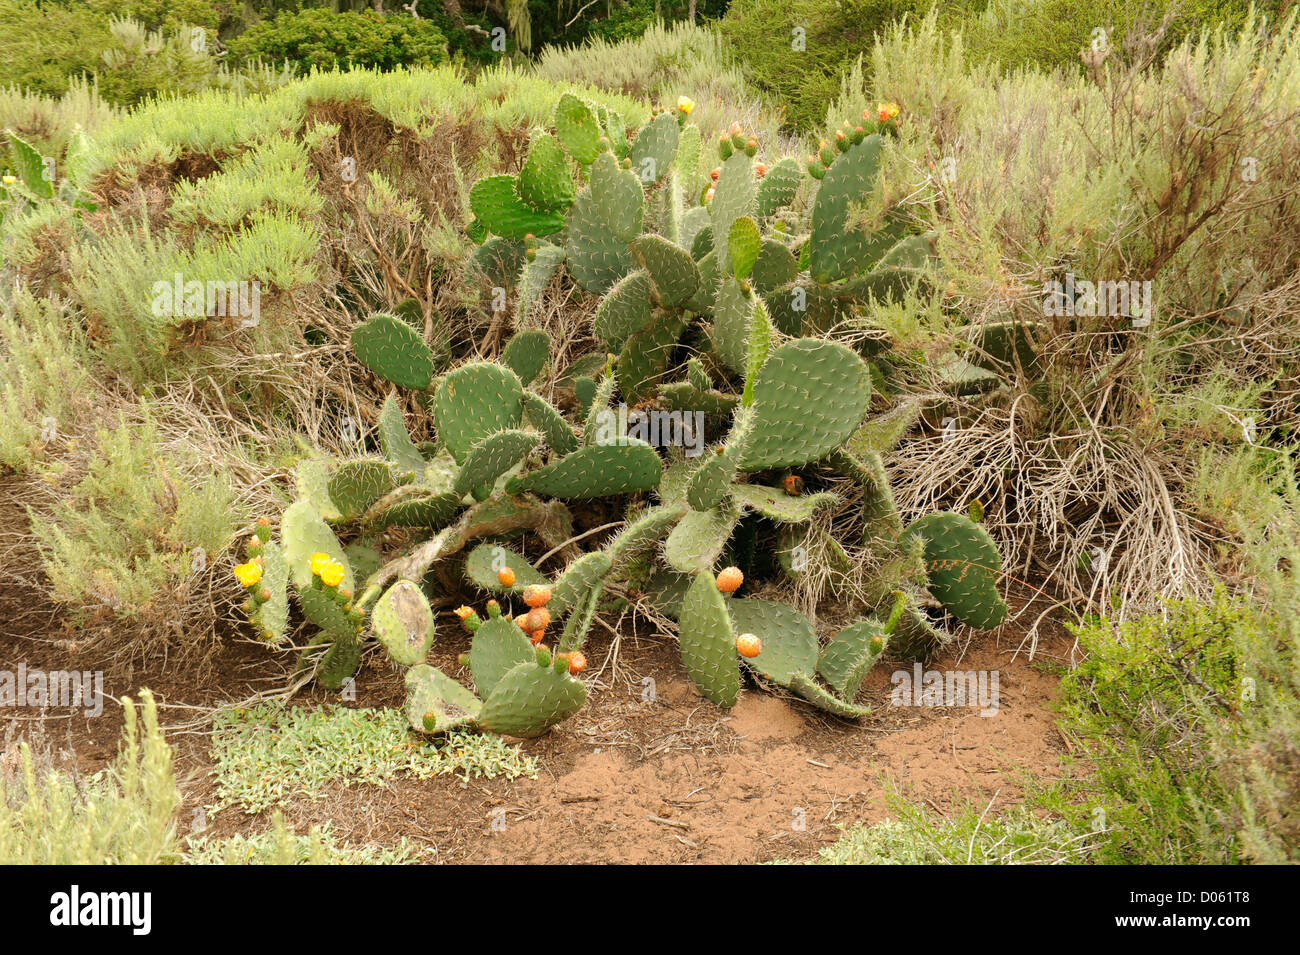 Large cactus with yellow flowers and buds Stock Photo